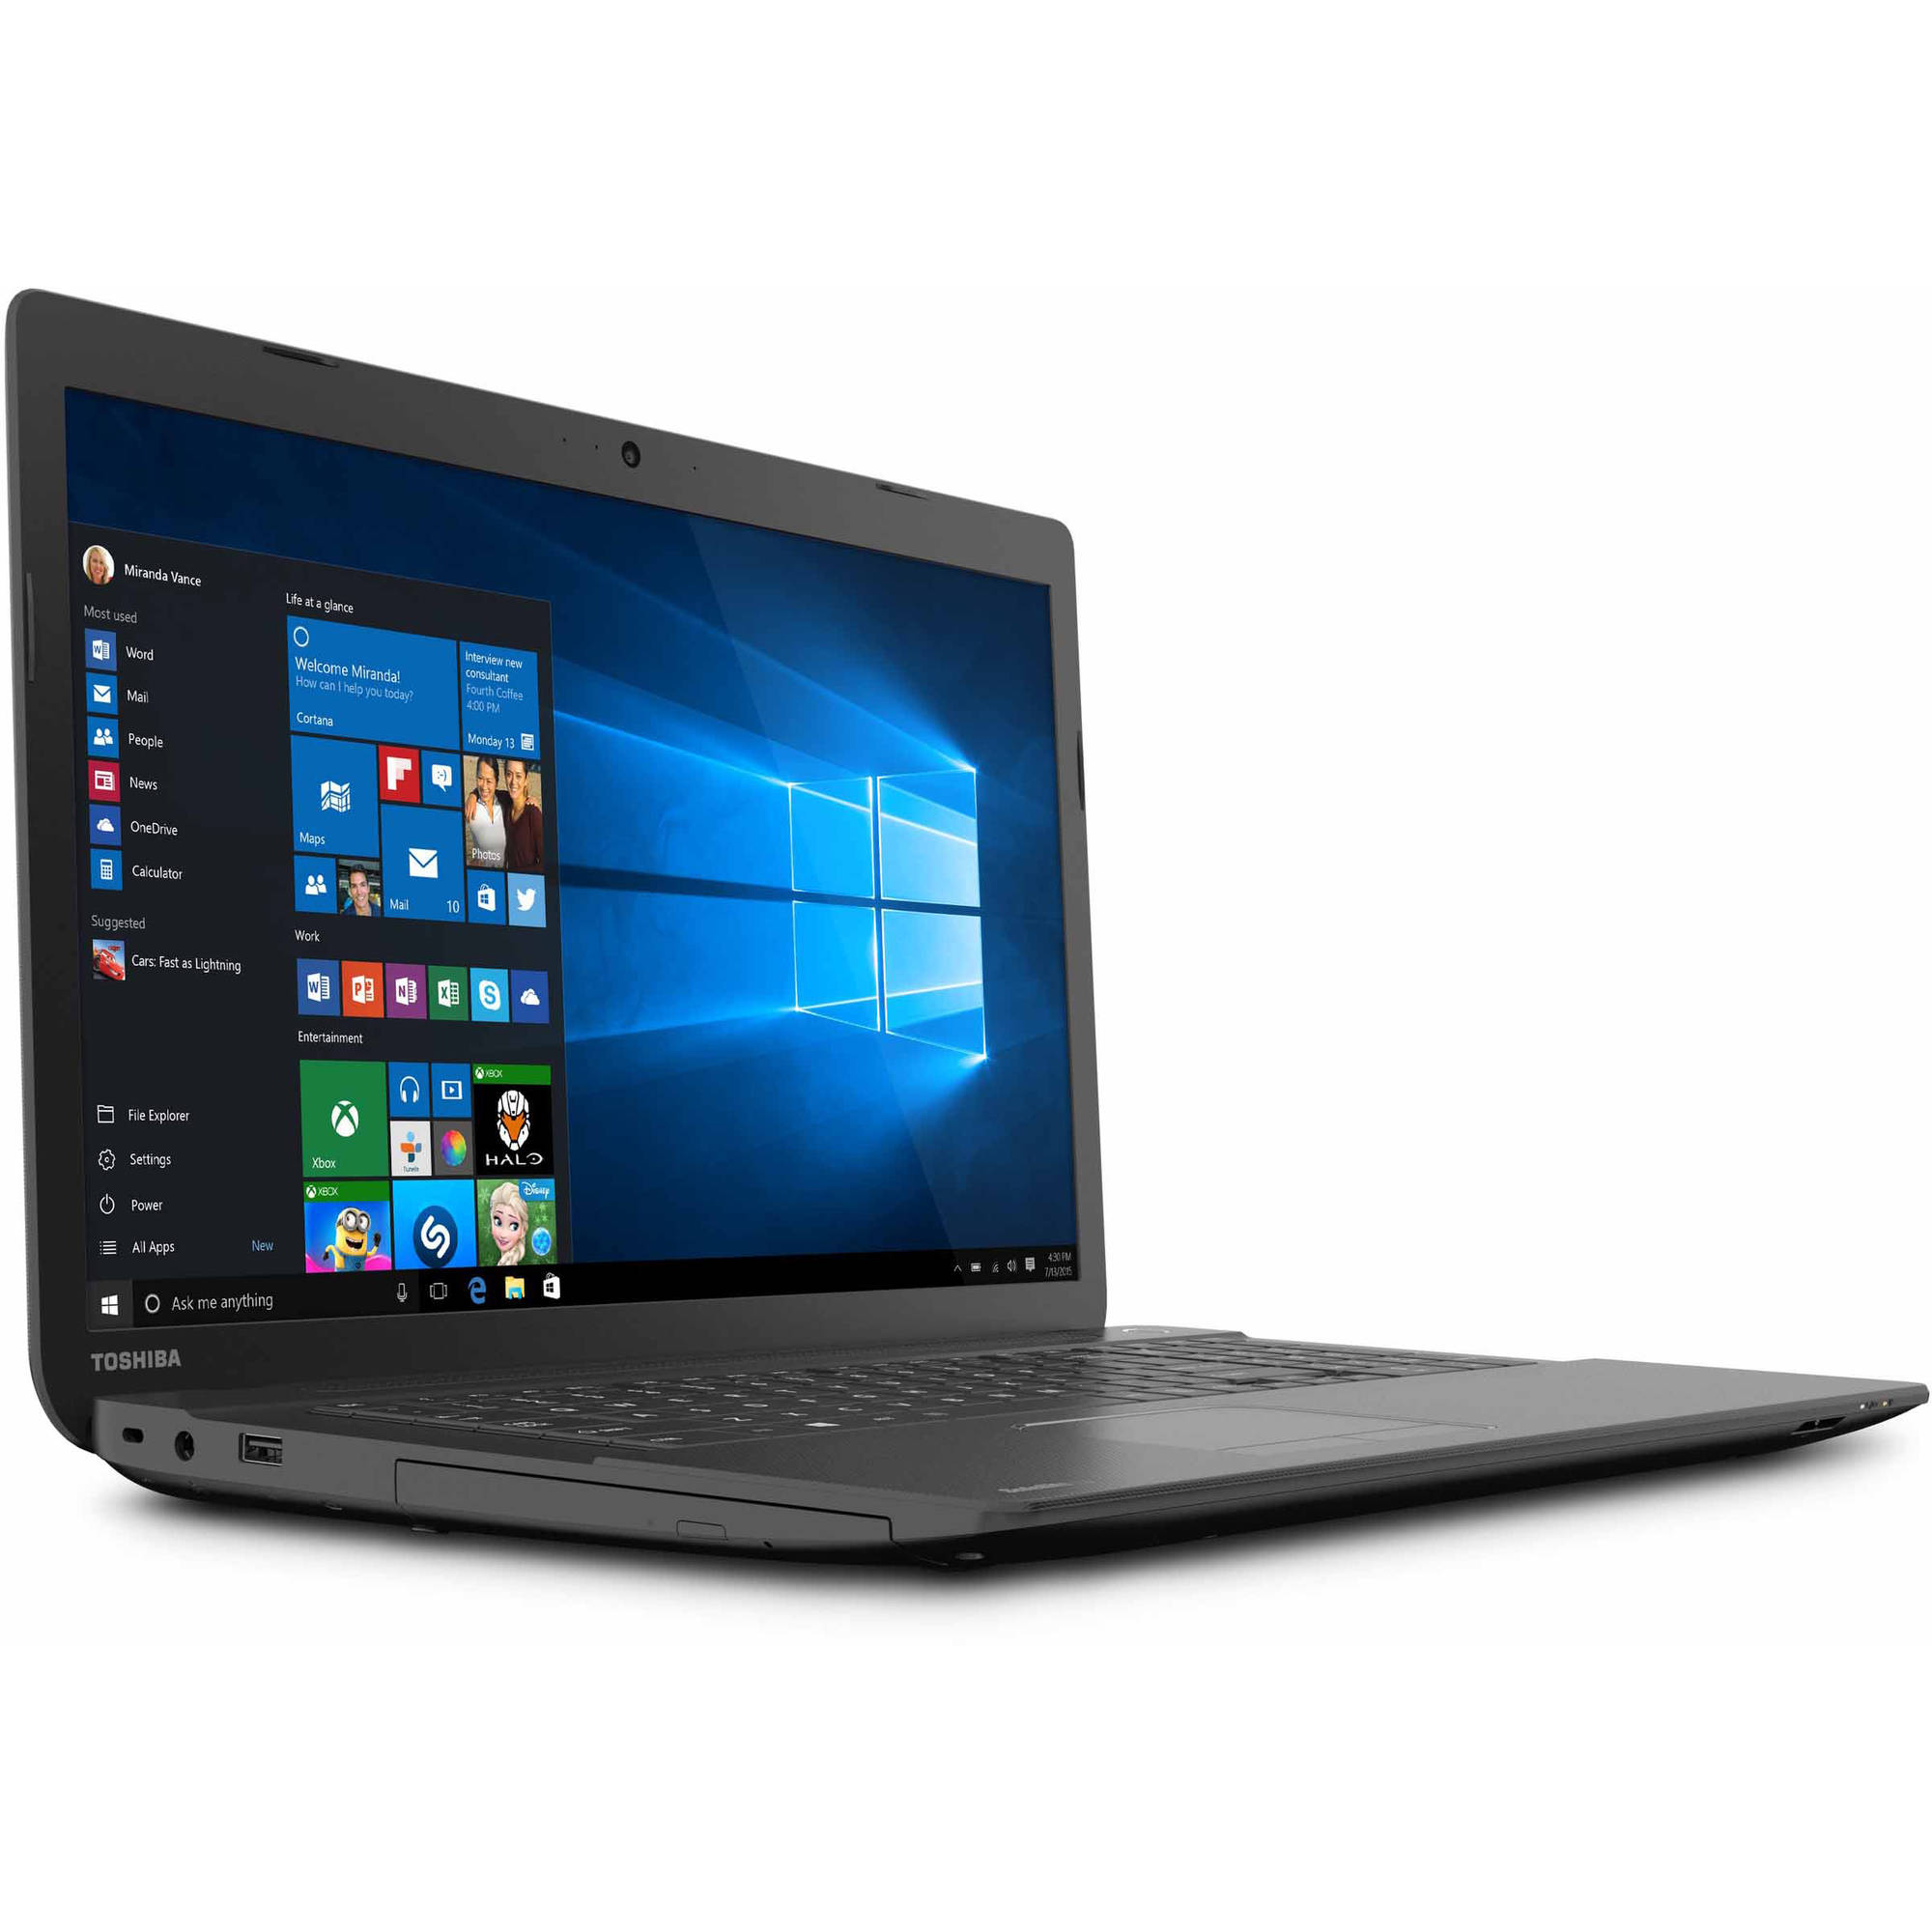 Toshiba Satellite C75D-B7320 - AMD A8 - 6410 / up to 2.4 GHz - Windows 10 Home - Radeon R5 - 6 GB RAM - 750 GB HDD - DVD SuperMulti - 17.3" 1600 x 900 (HD+) - textured resin in jet black - image 3 of 12